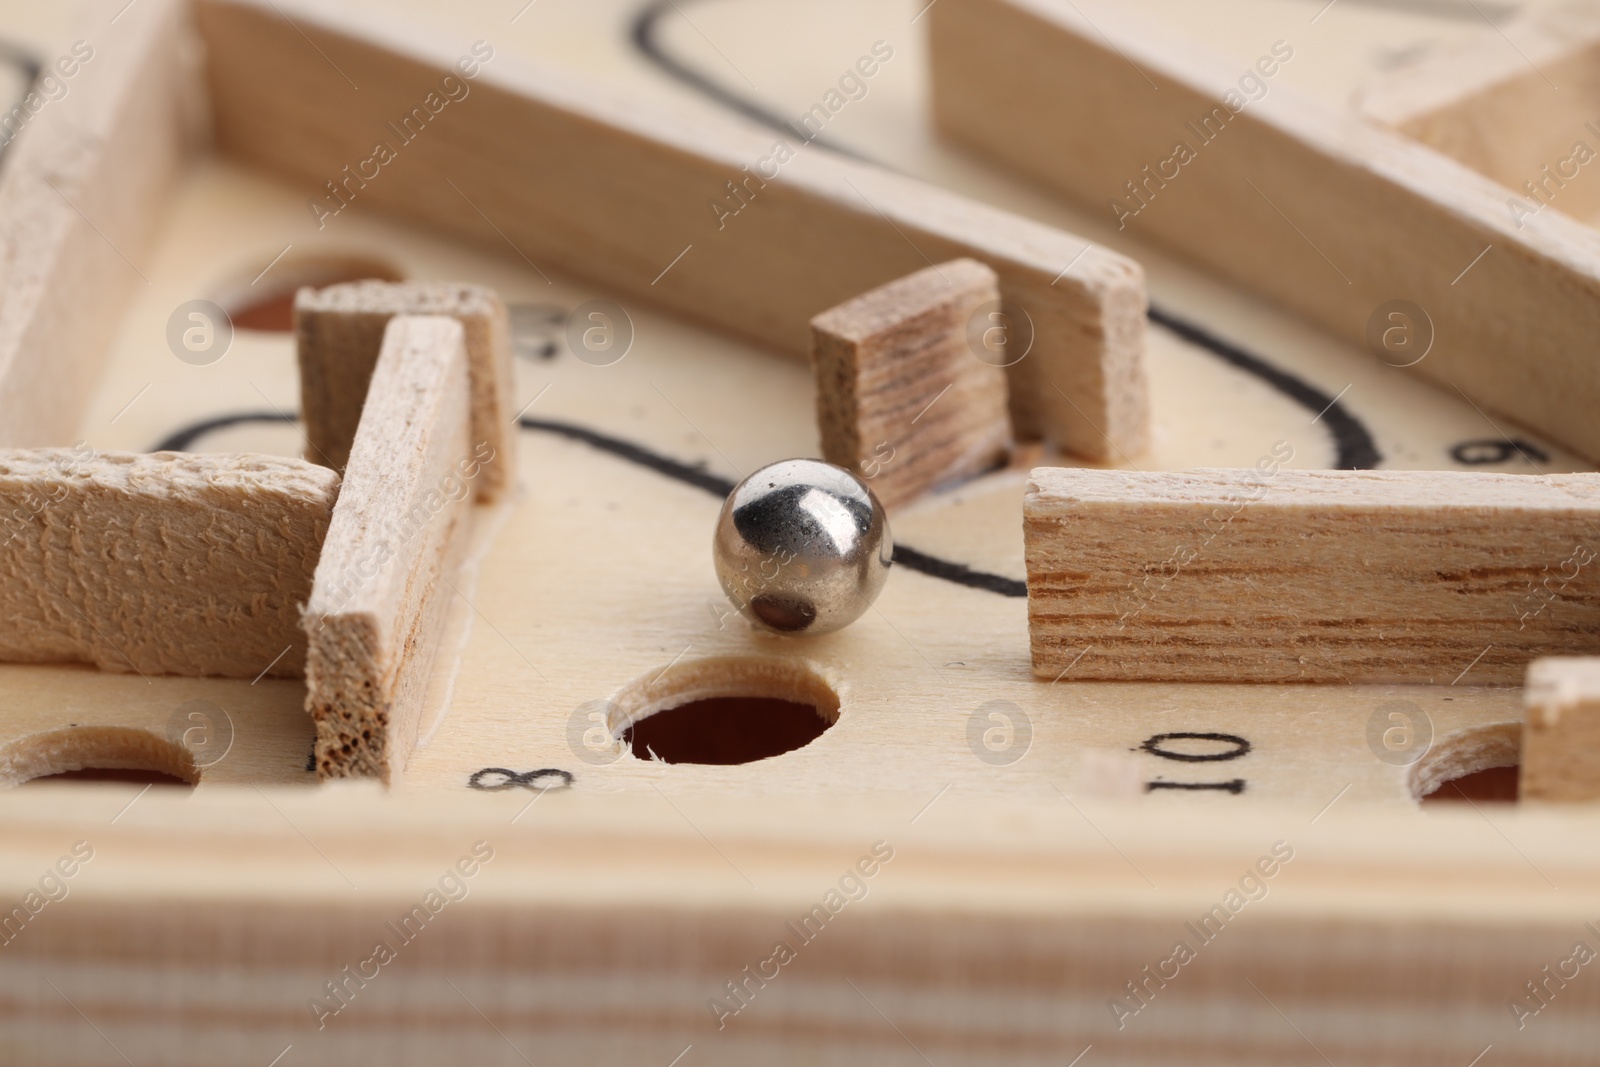 Photo of Wooden toy maze with metal ball, closeup